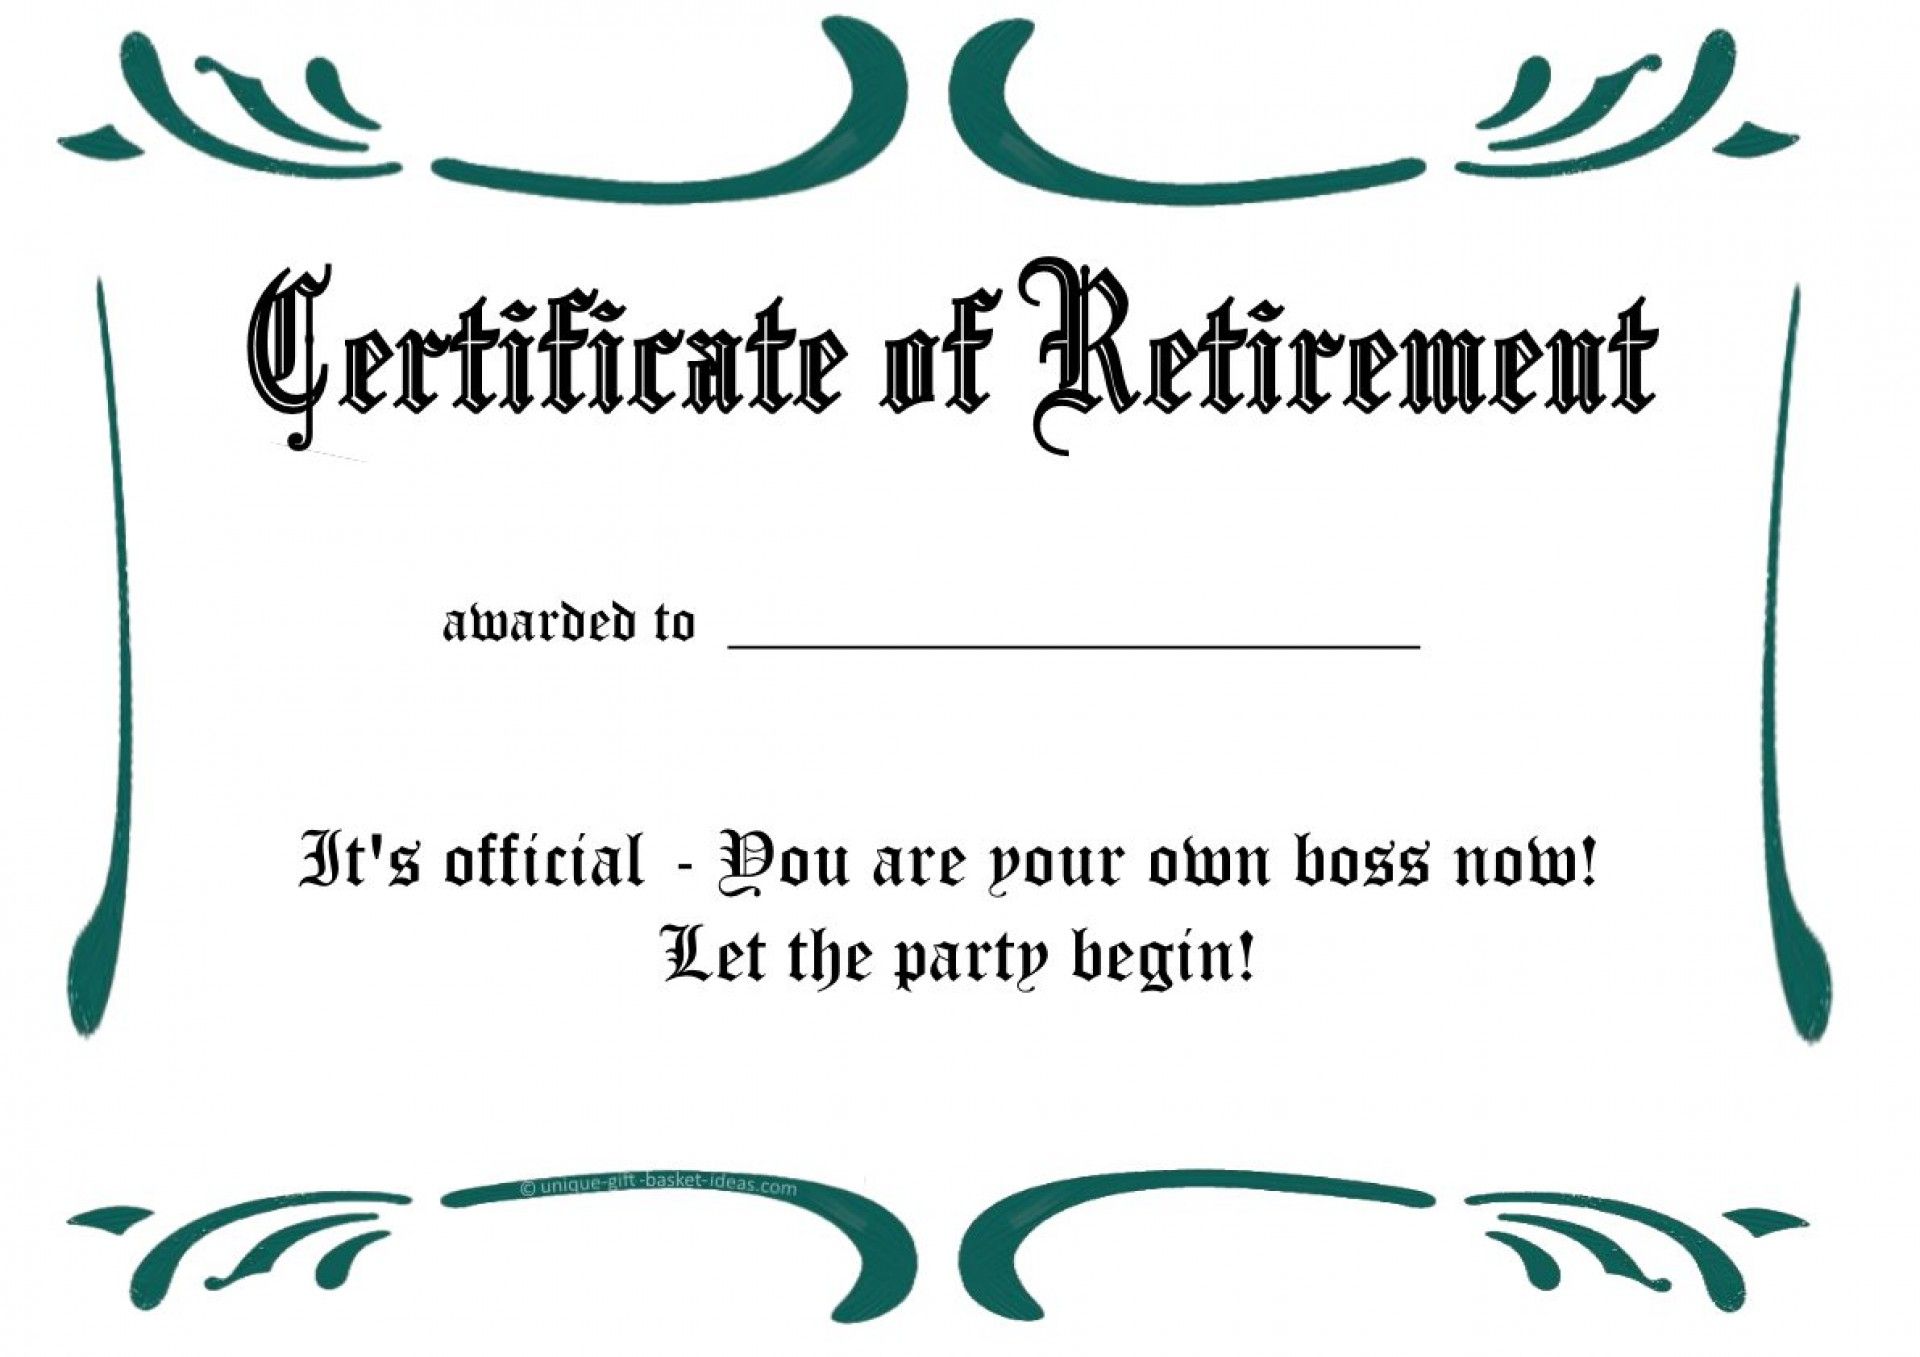 free retirement certificate template, retirement certificate of appreciation, navy retirement certificate template, usmc retirement certificate template, air force retirement certificate template, teacher retirement certificate template, retirement award certificate template, free retirement certificate templates for word, free retirement certificate template word, certificate of retirement template fillable